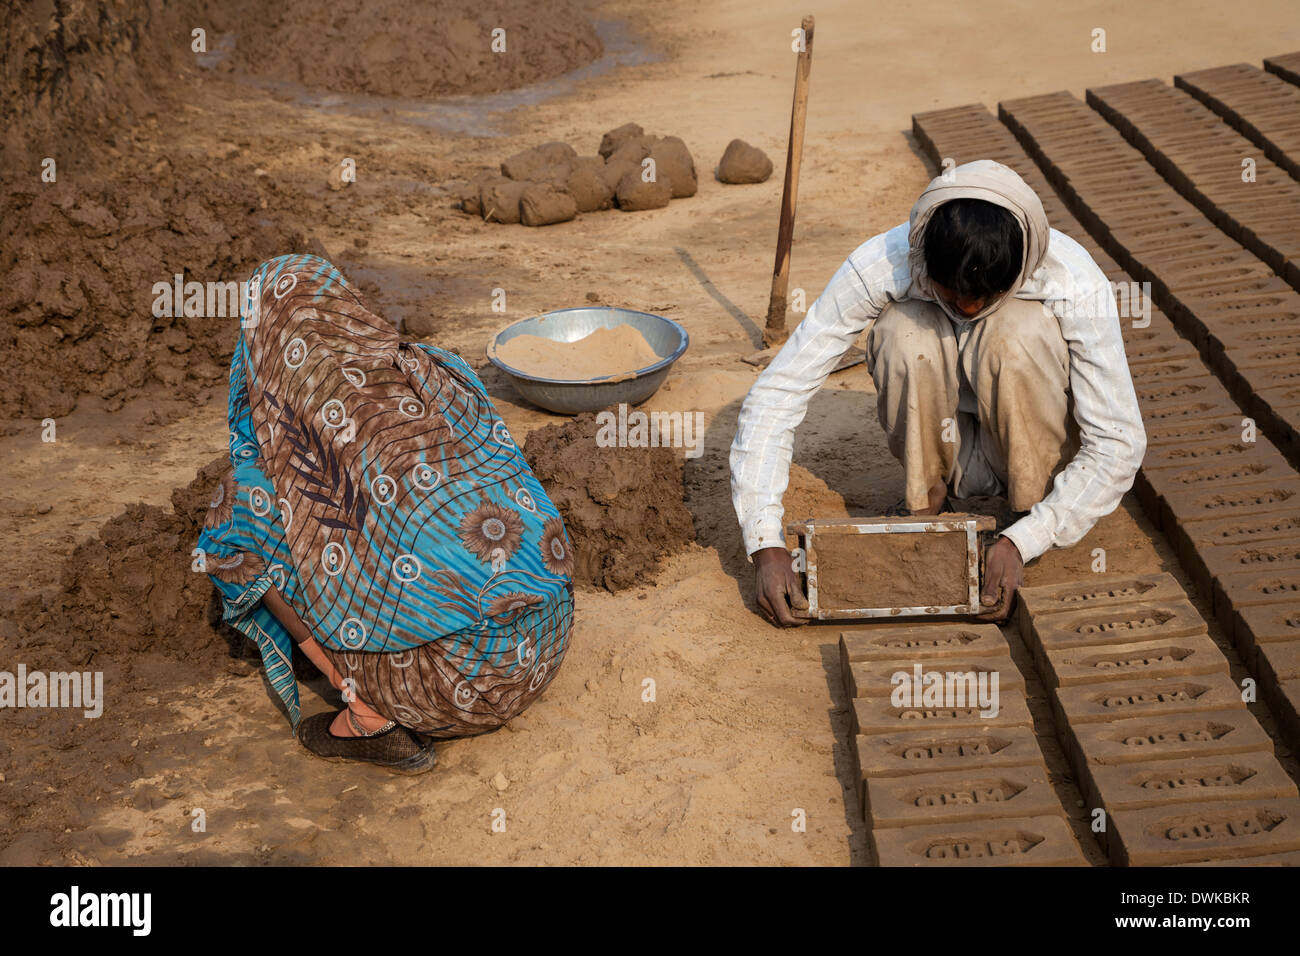 Rajasthan, India. Husband Turns Brick Mold Over while Wife Prepares Mud for the Next Brick. Stock Photo